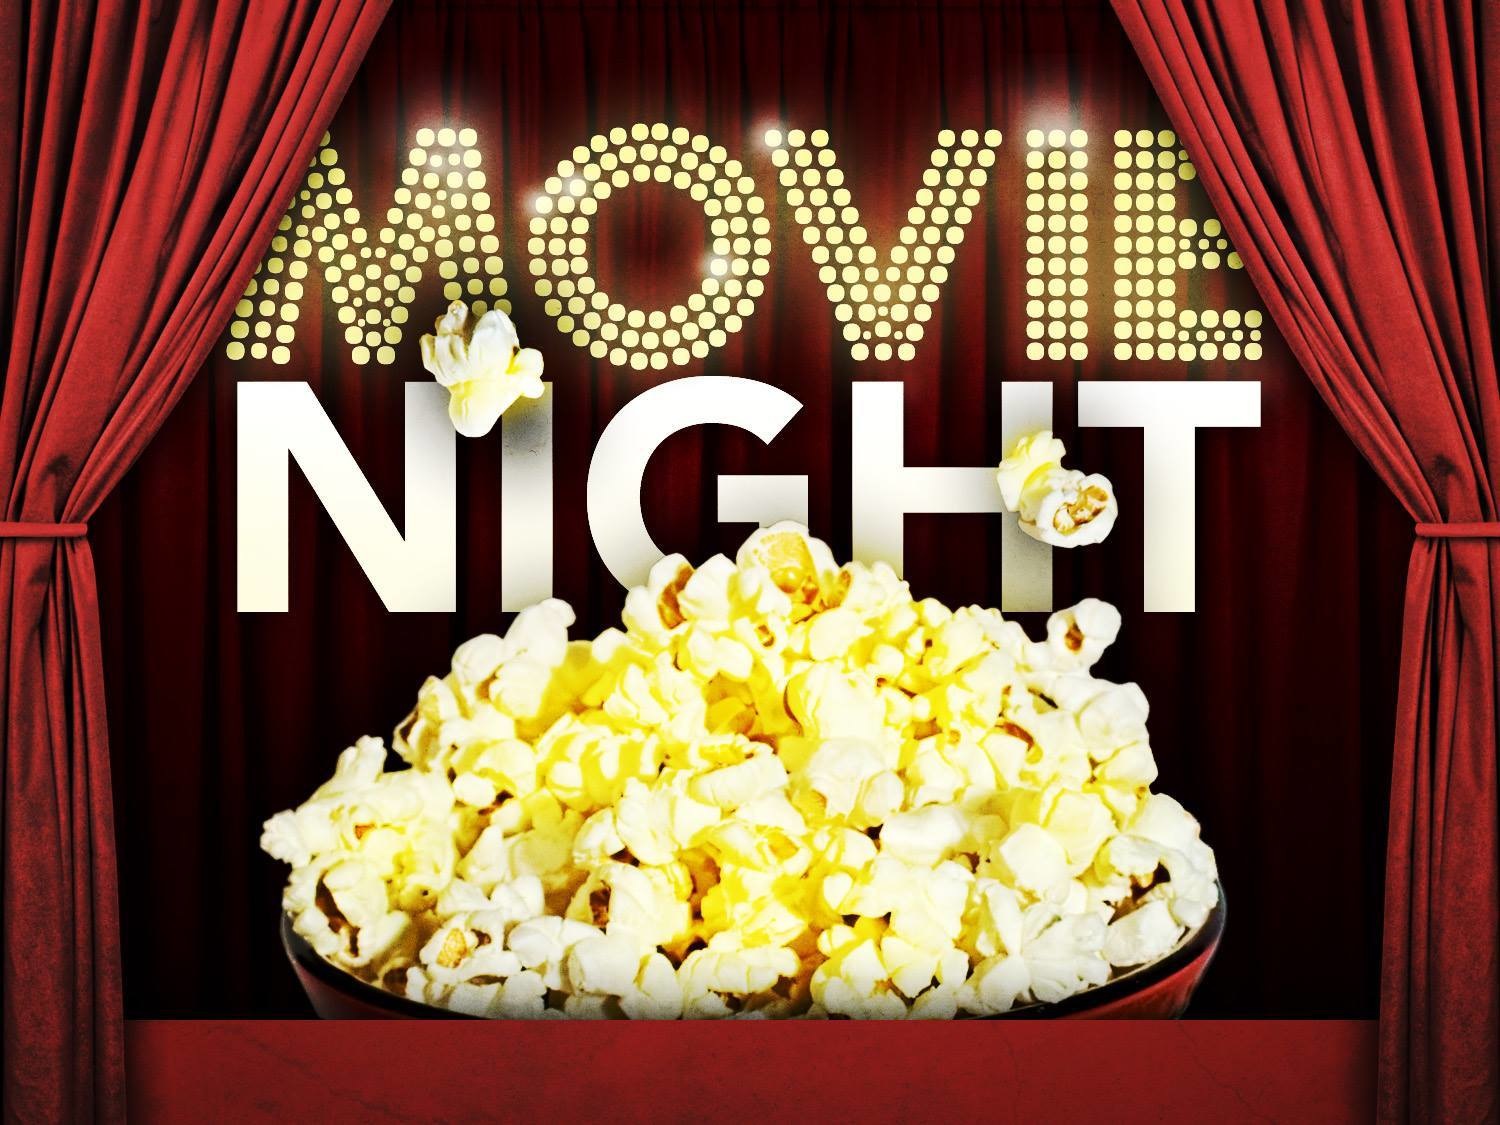 SORO NC Presents... MOVIE in the PARK!